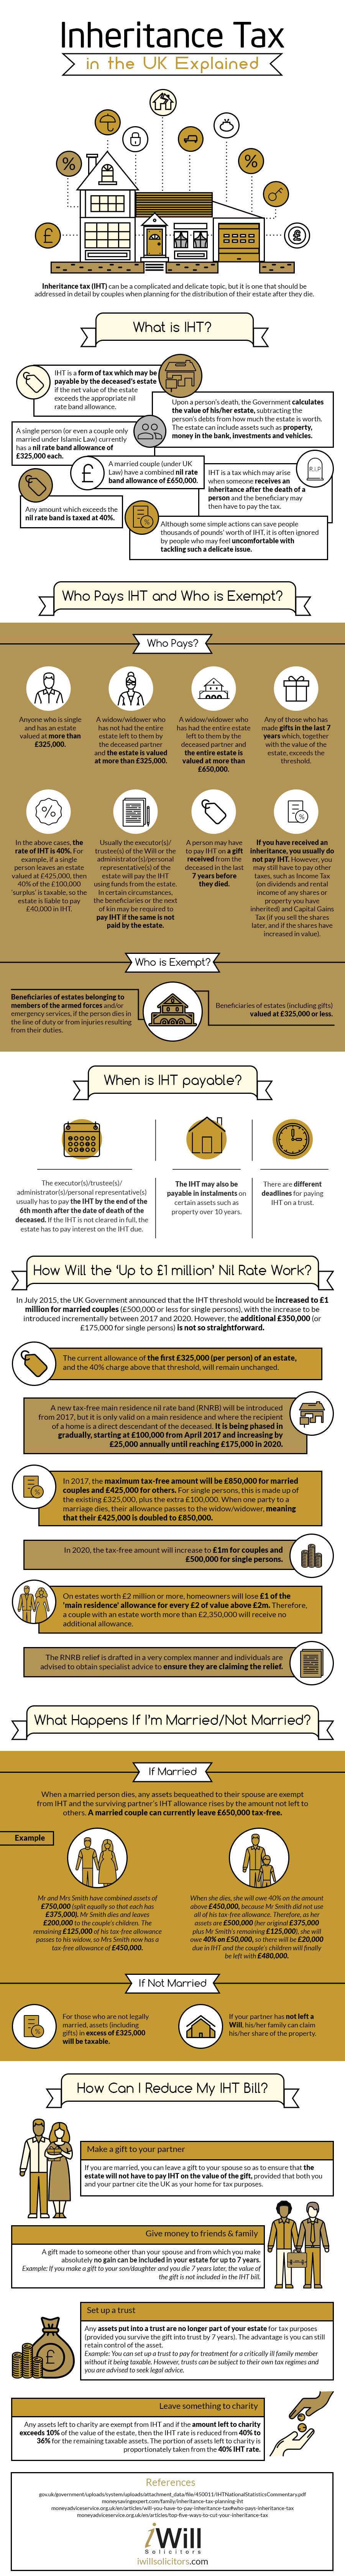 Inheritance-Tax-in-the-UK-Infographic